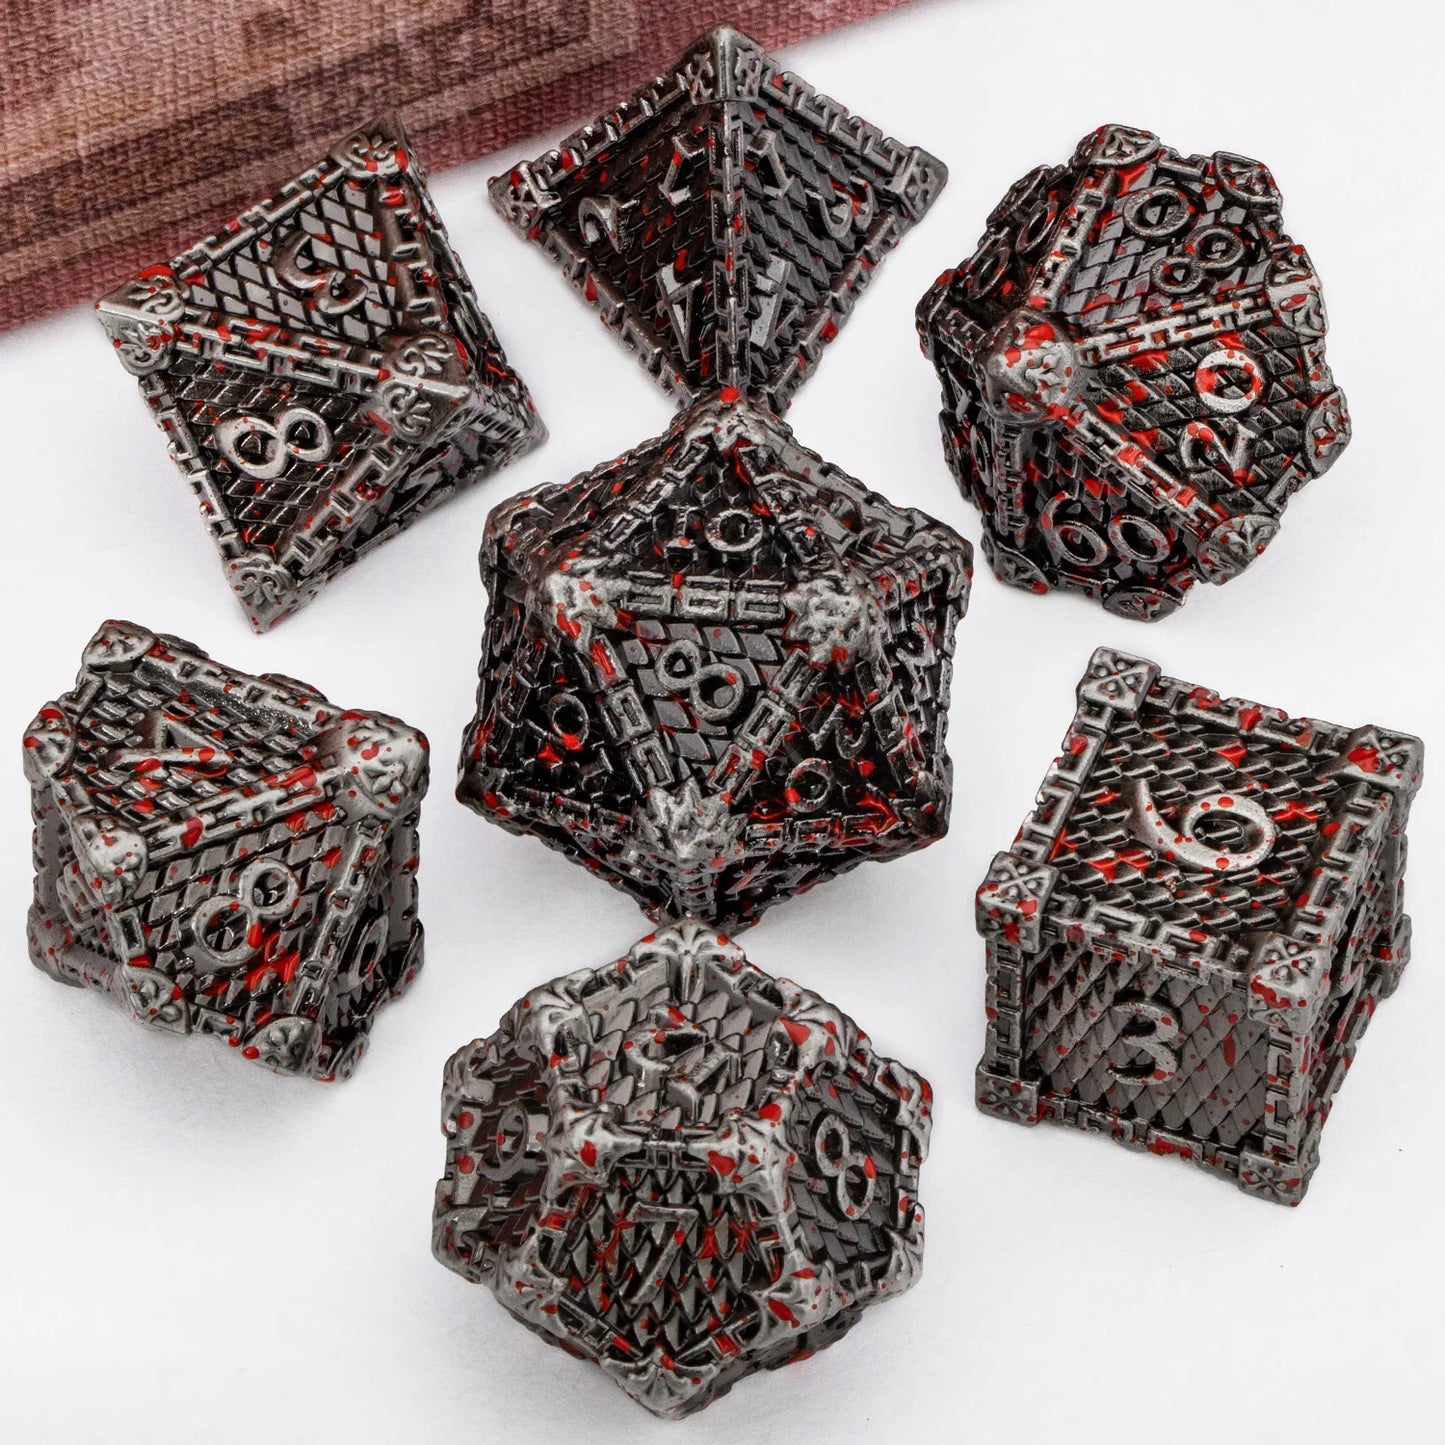 DND Metal Dice Set Dragon Scale D&D Dice Dungeon and Dragon Role Playing Games Black Green Polyhedral Dice RPG D and D Dice Blood Spatter